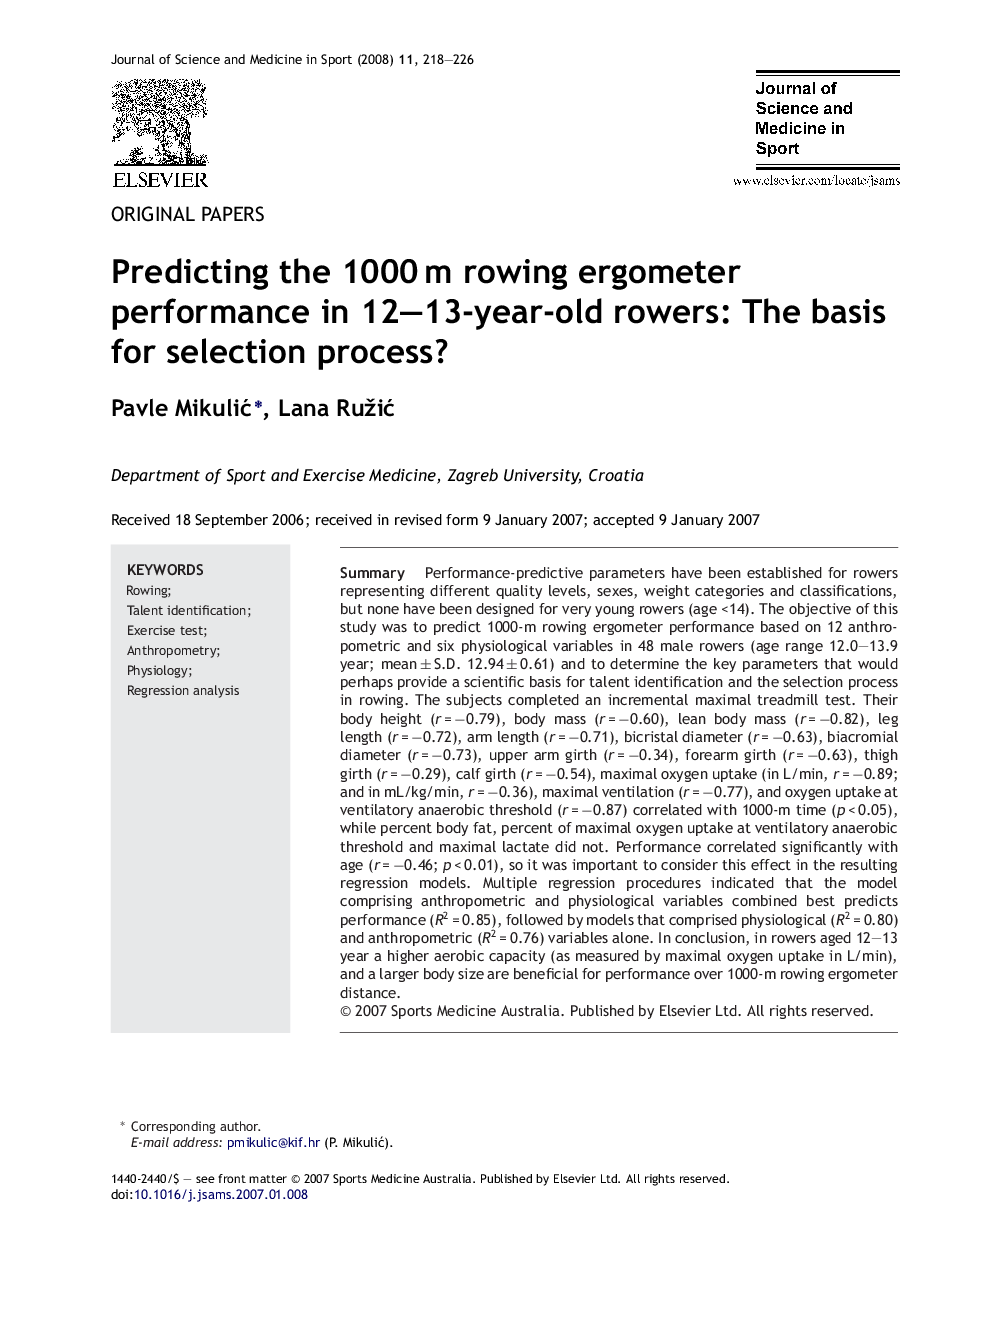 Predicting the 1000 m rowing ergometer performance in 12–13-year-old rowers: The basis for selection process?